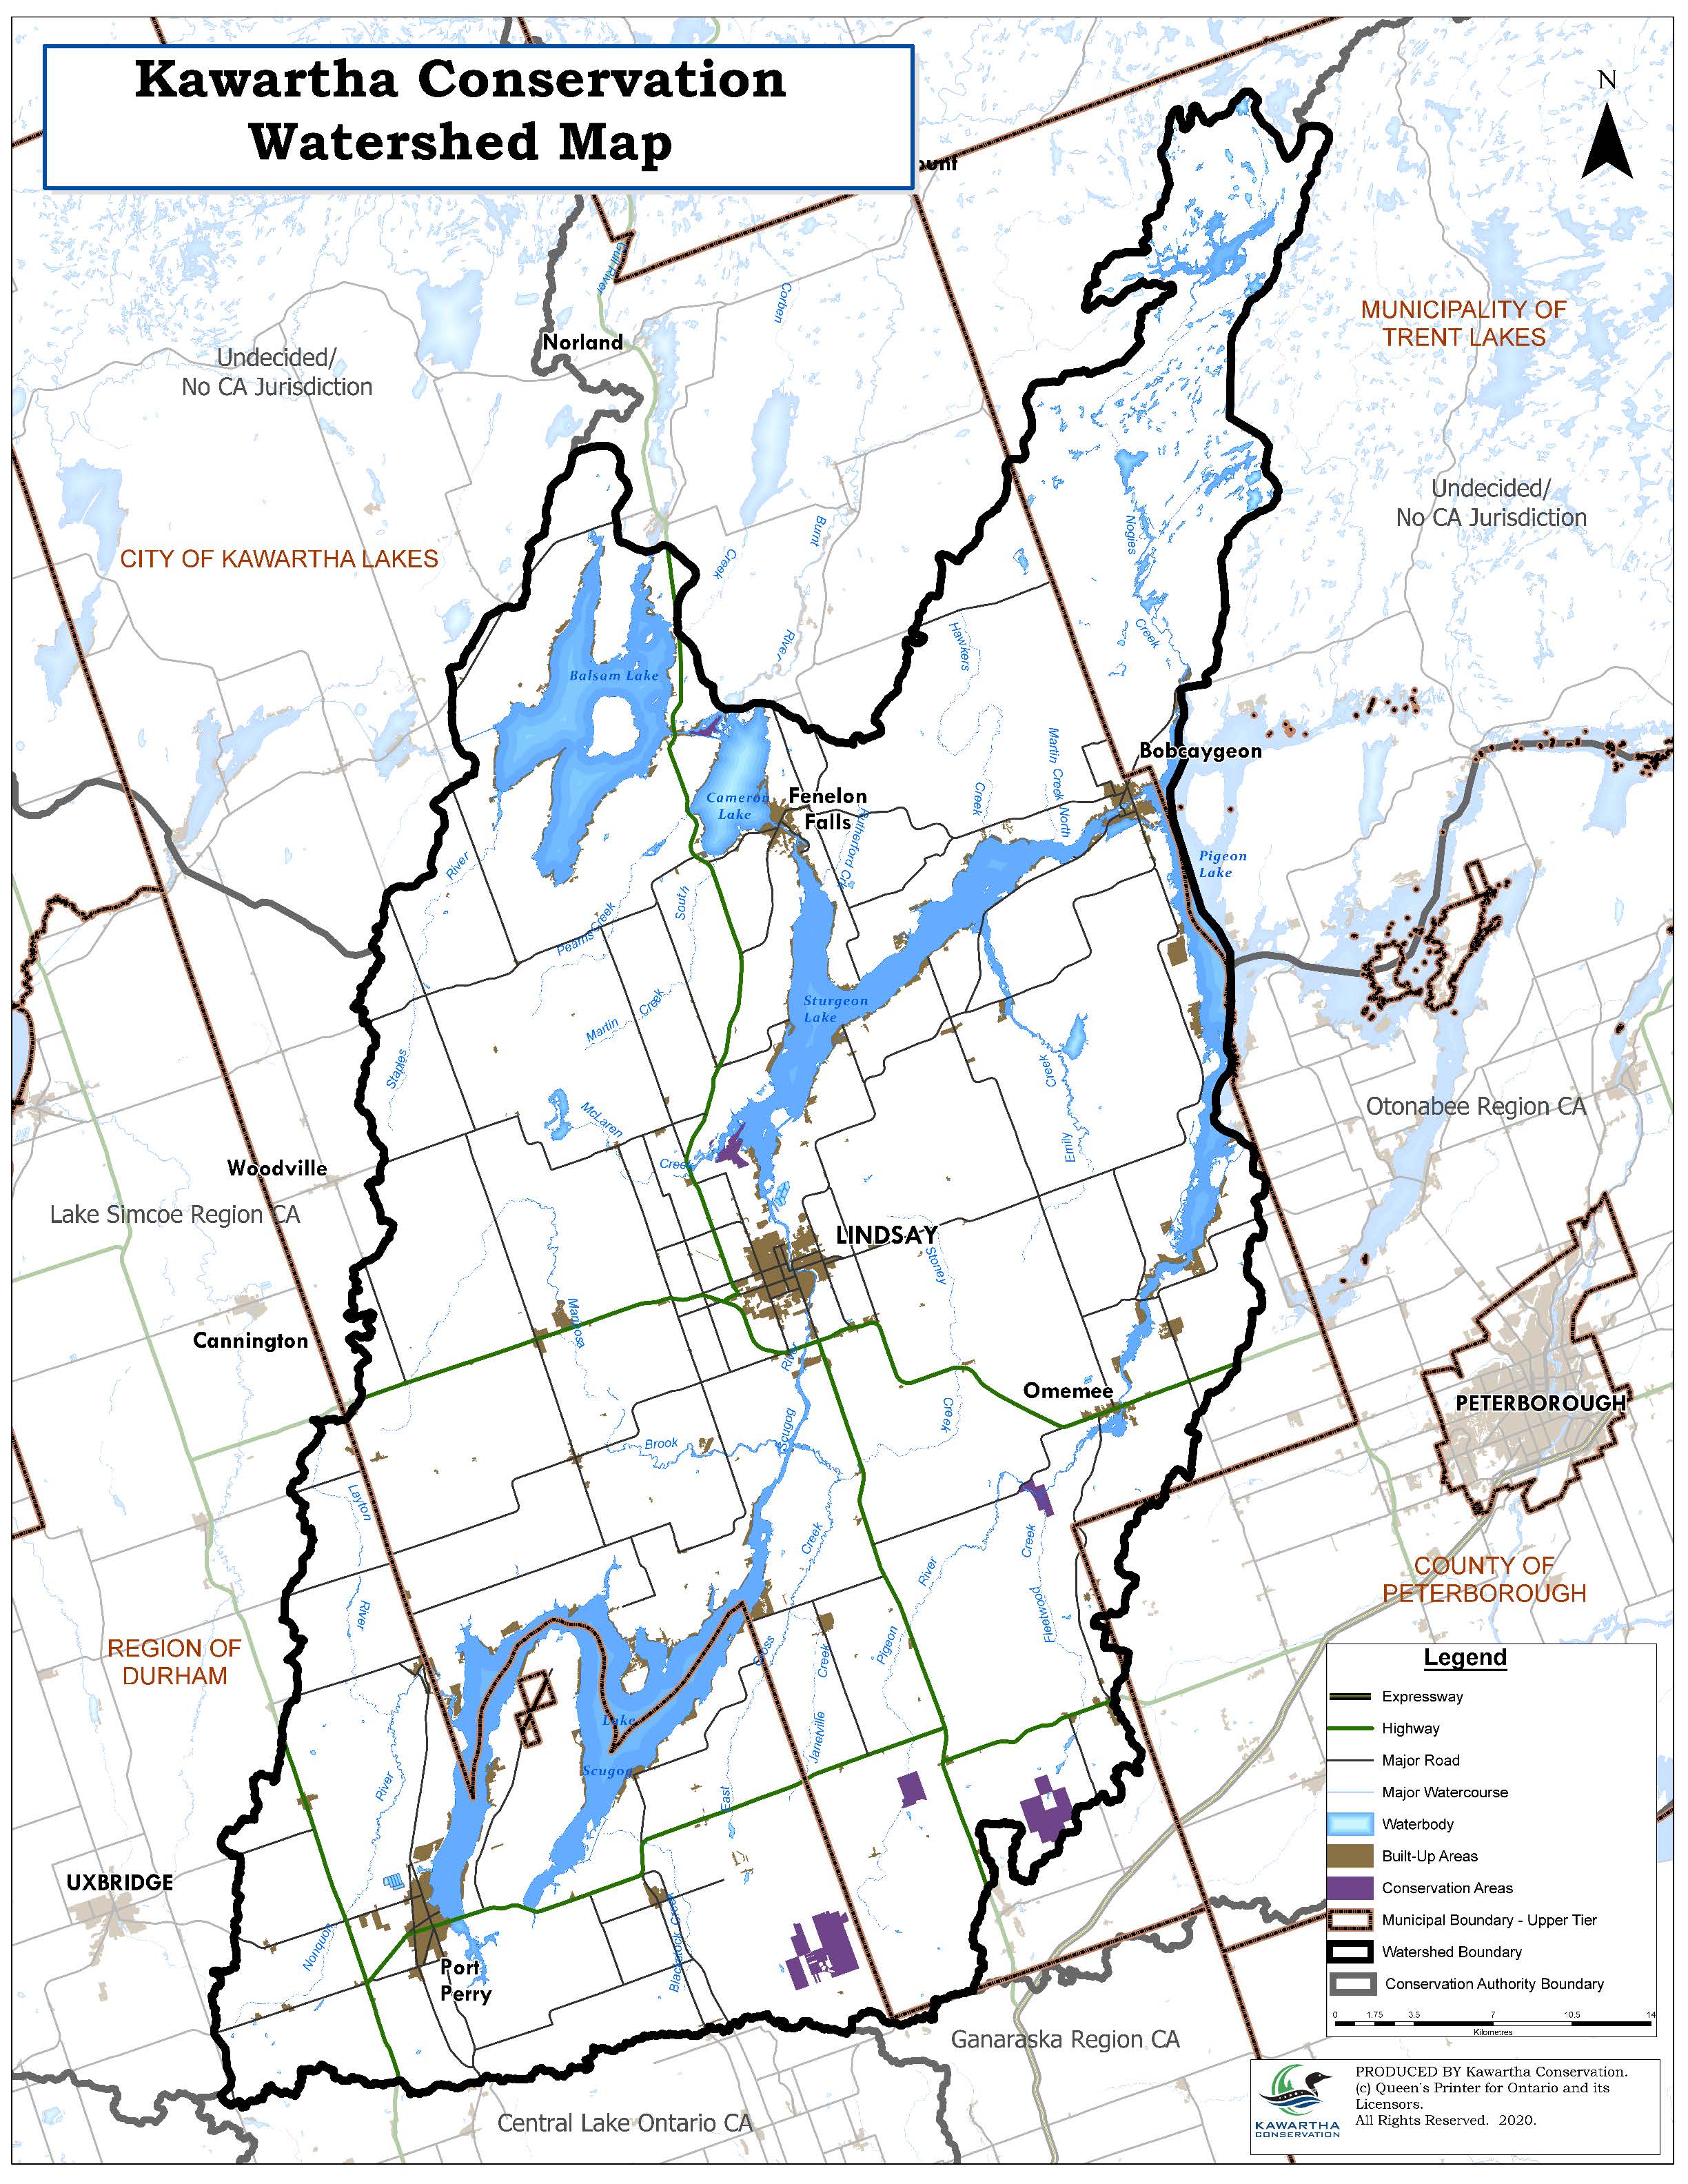 Understanding your Watershed - Kawartha Conservation